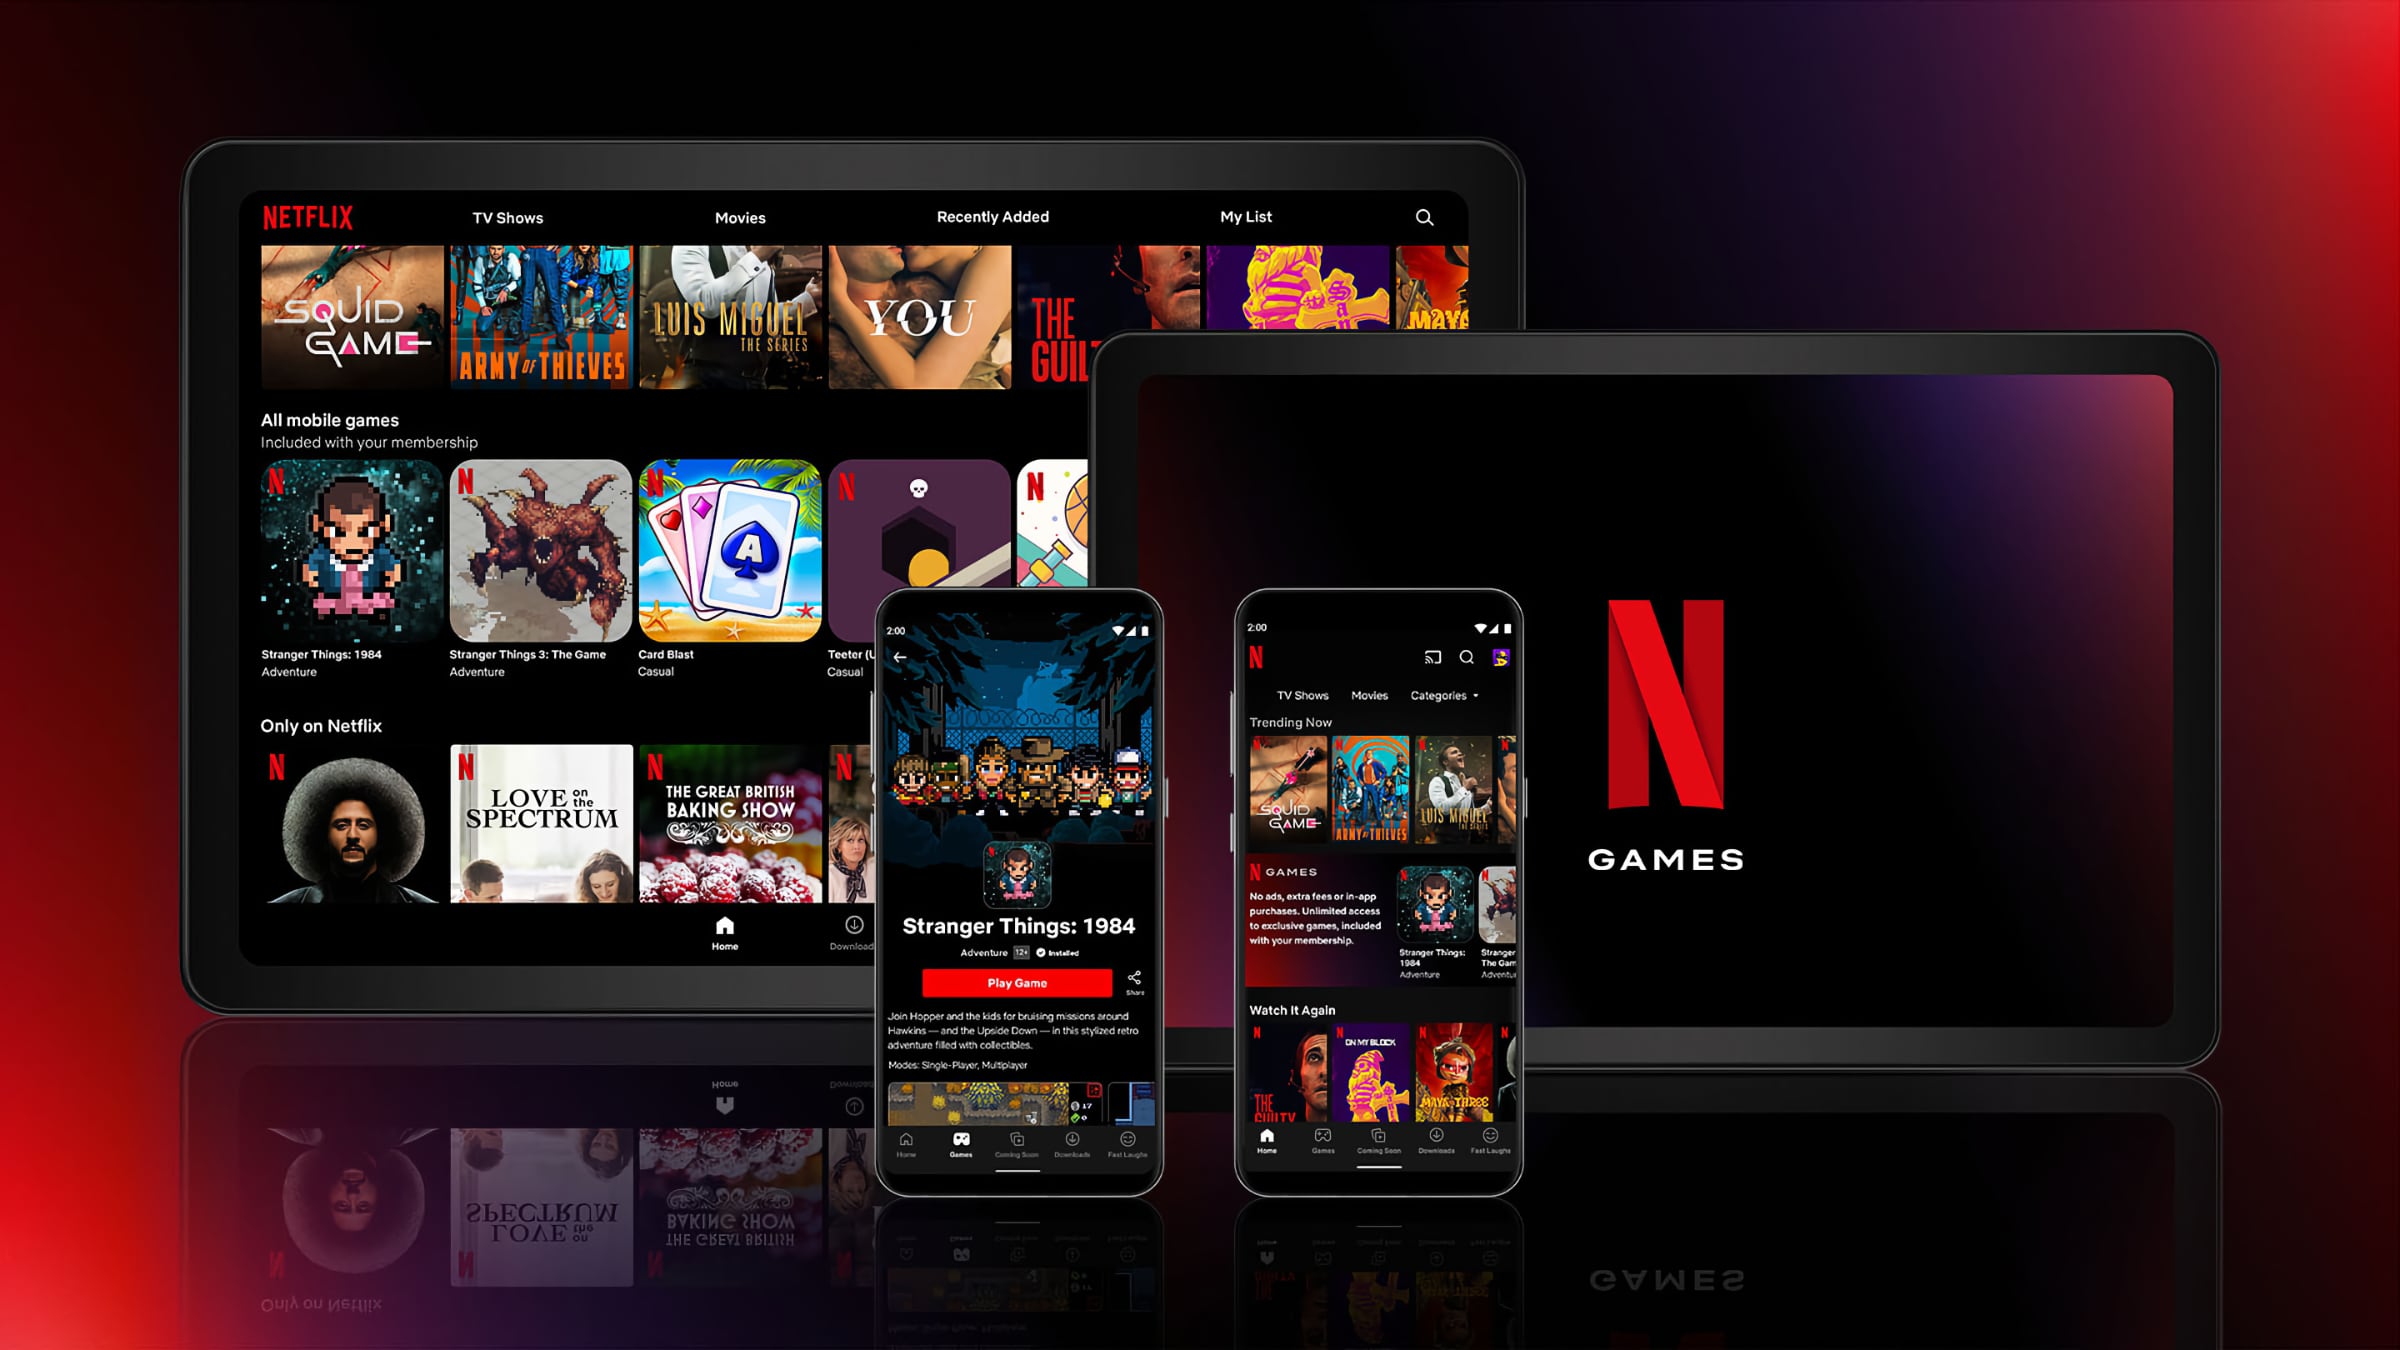 Netflix is very seriously exploring TV and PC gaming - FlatpanelsHD